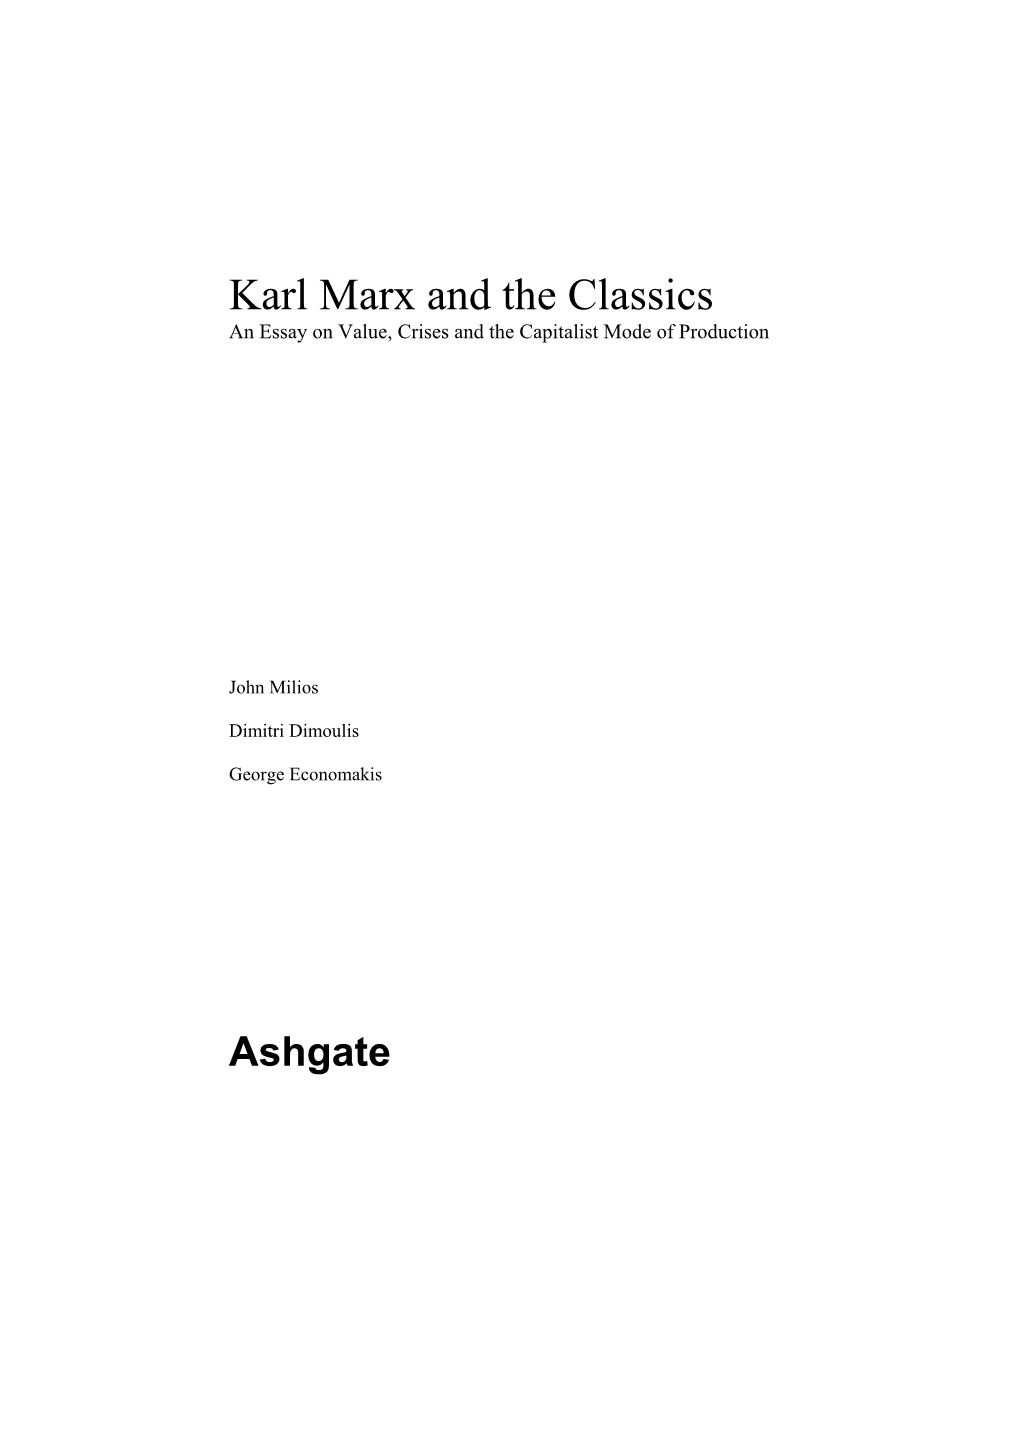 Karl Marx and the Classics an Essay on Value, Crises and the Capitalist Mode of Production